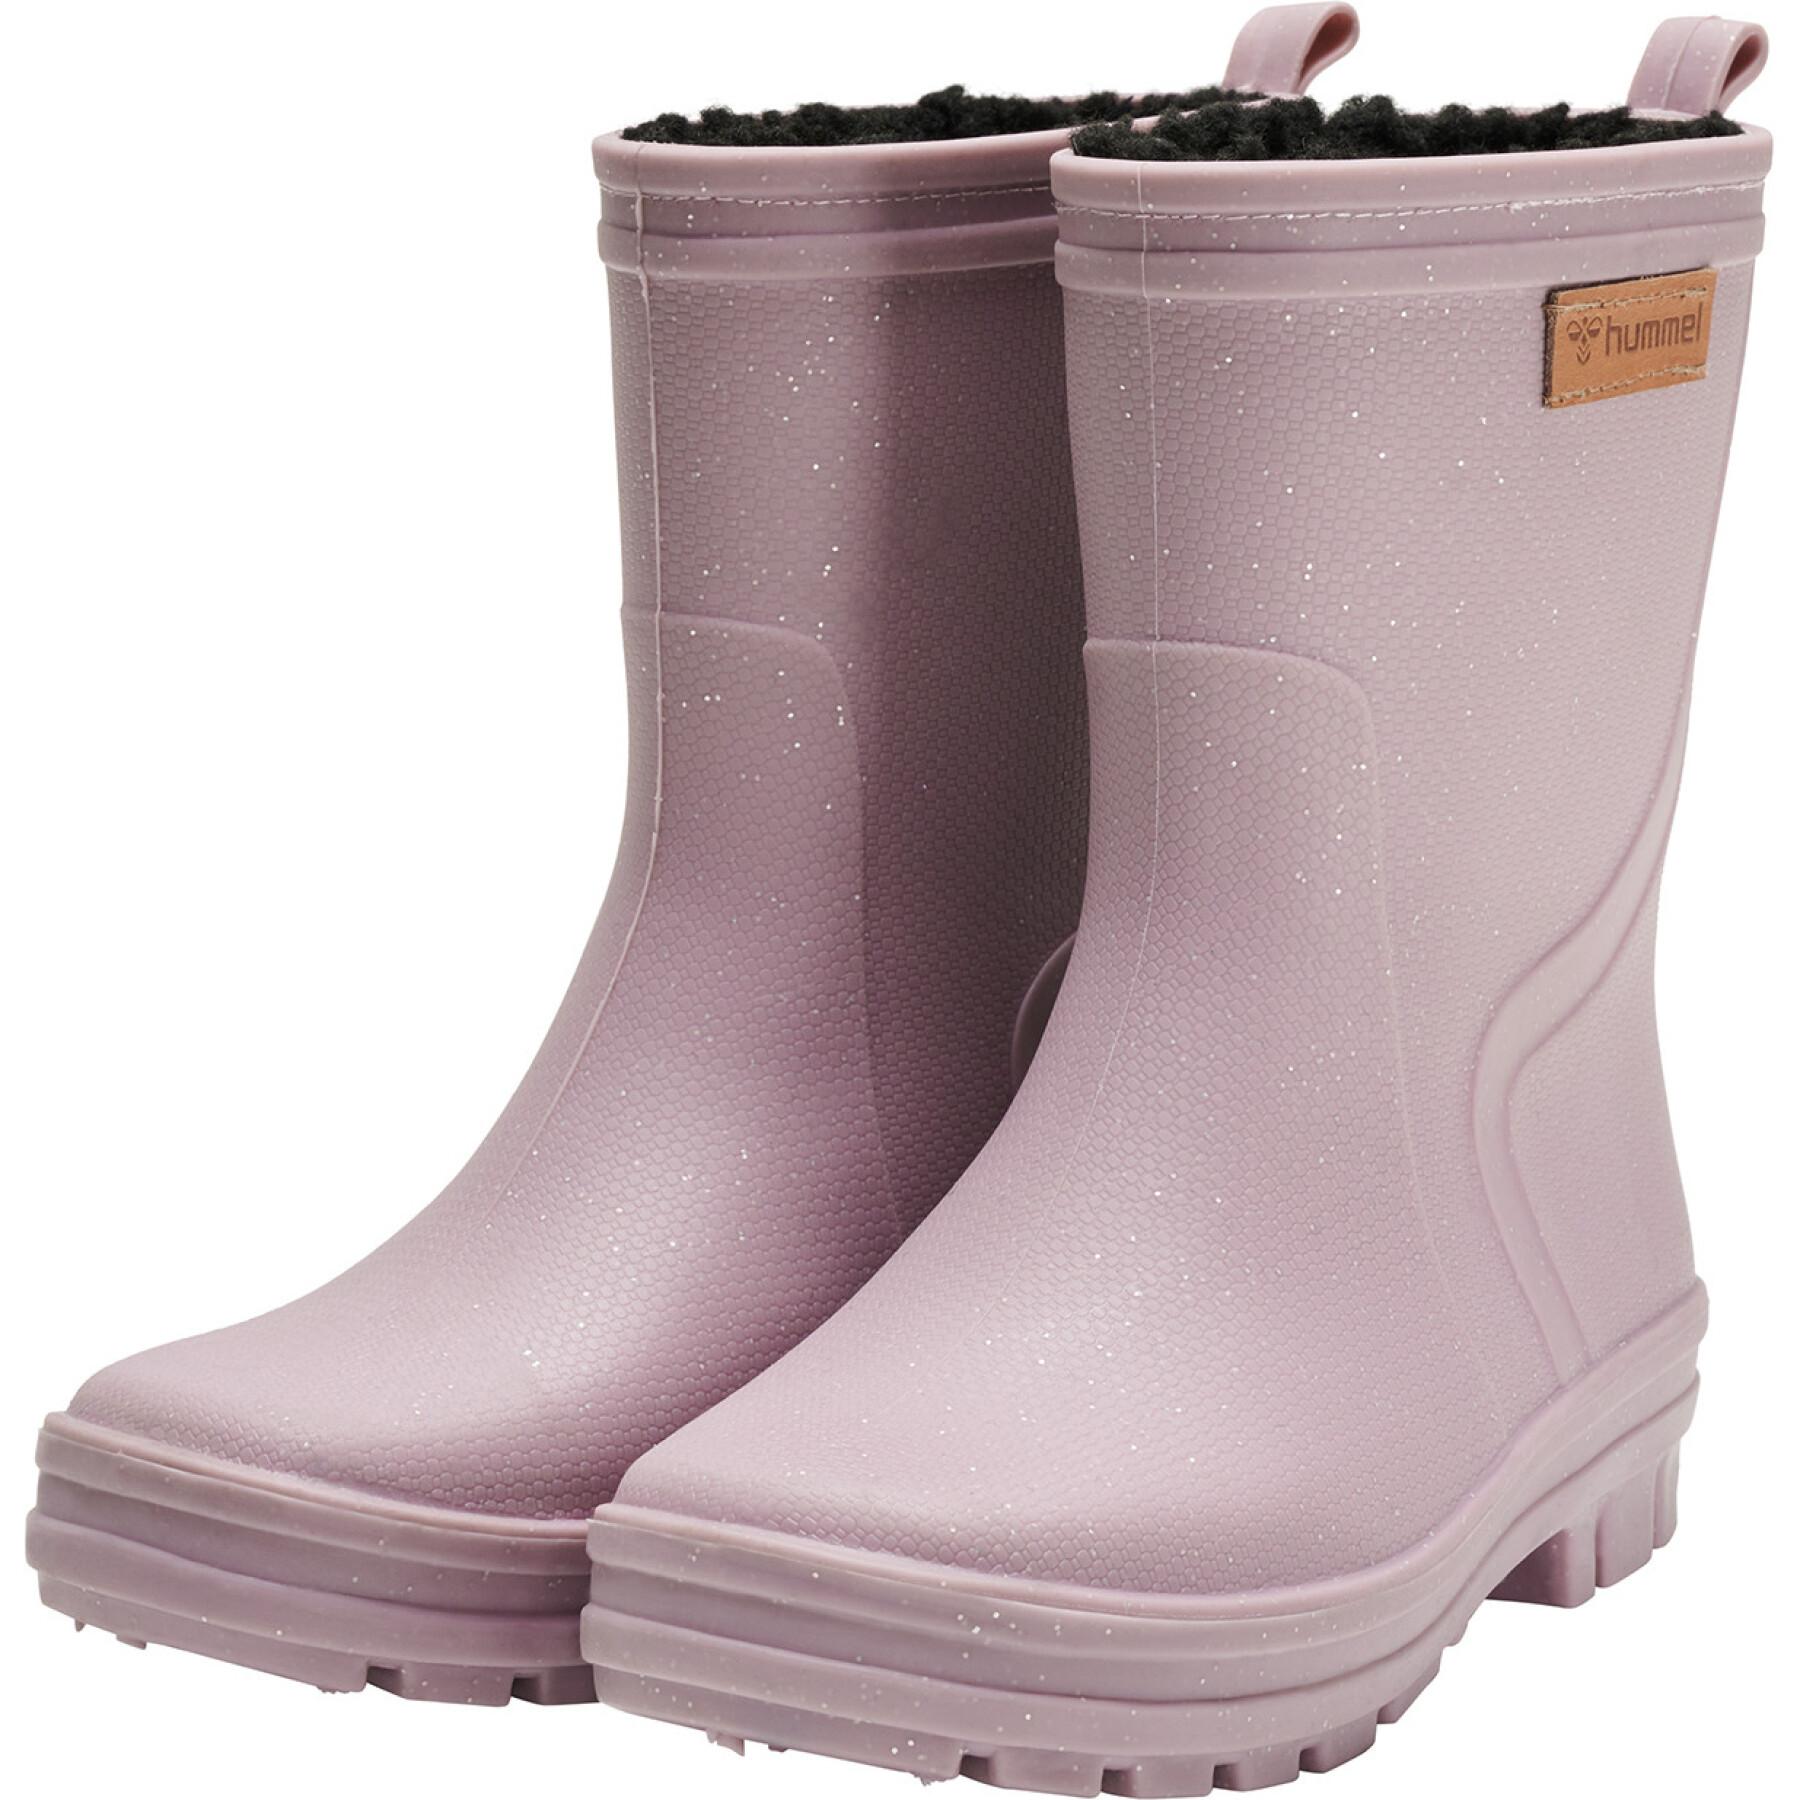 Children's boots Hummel THERMO